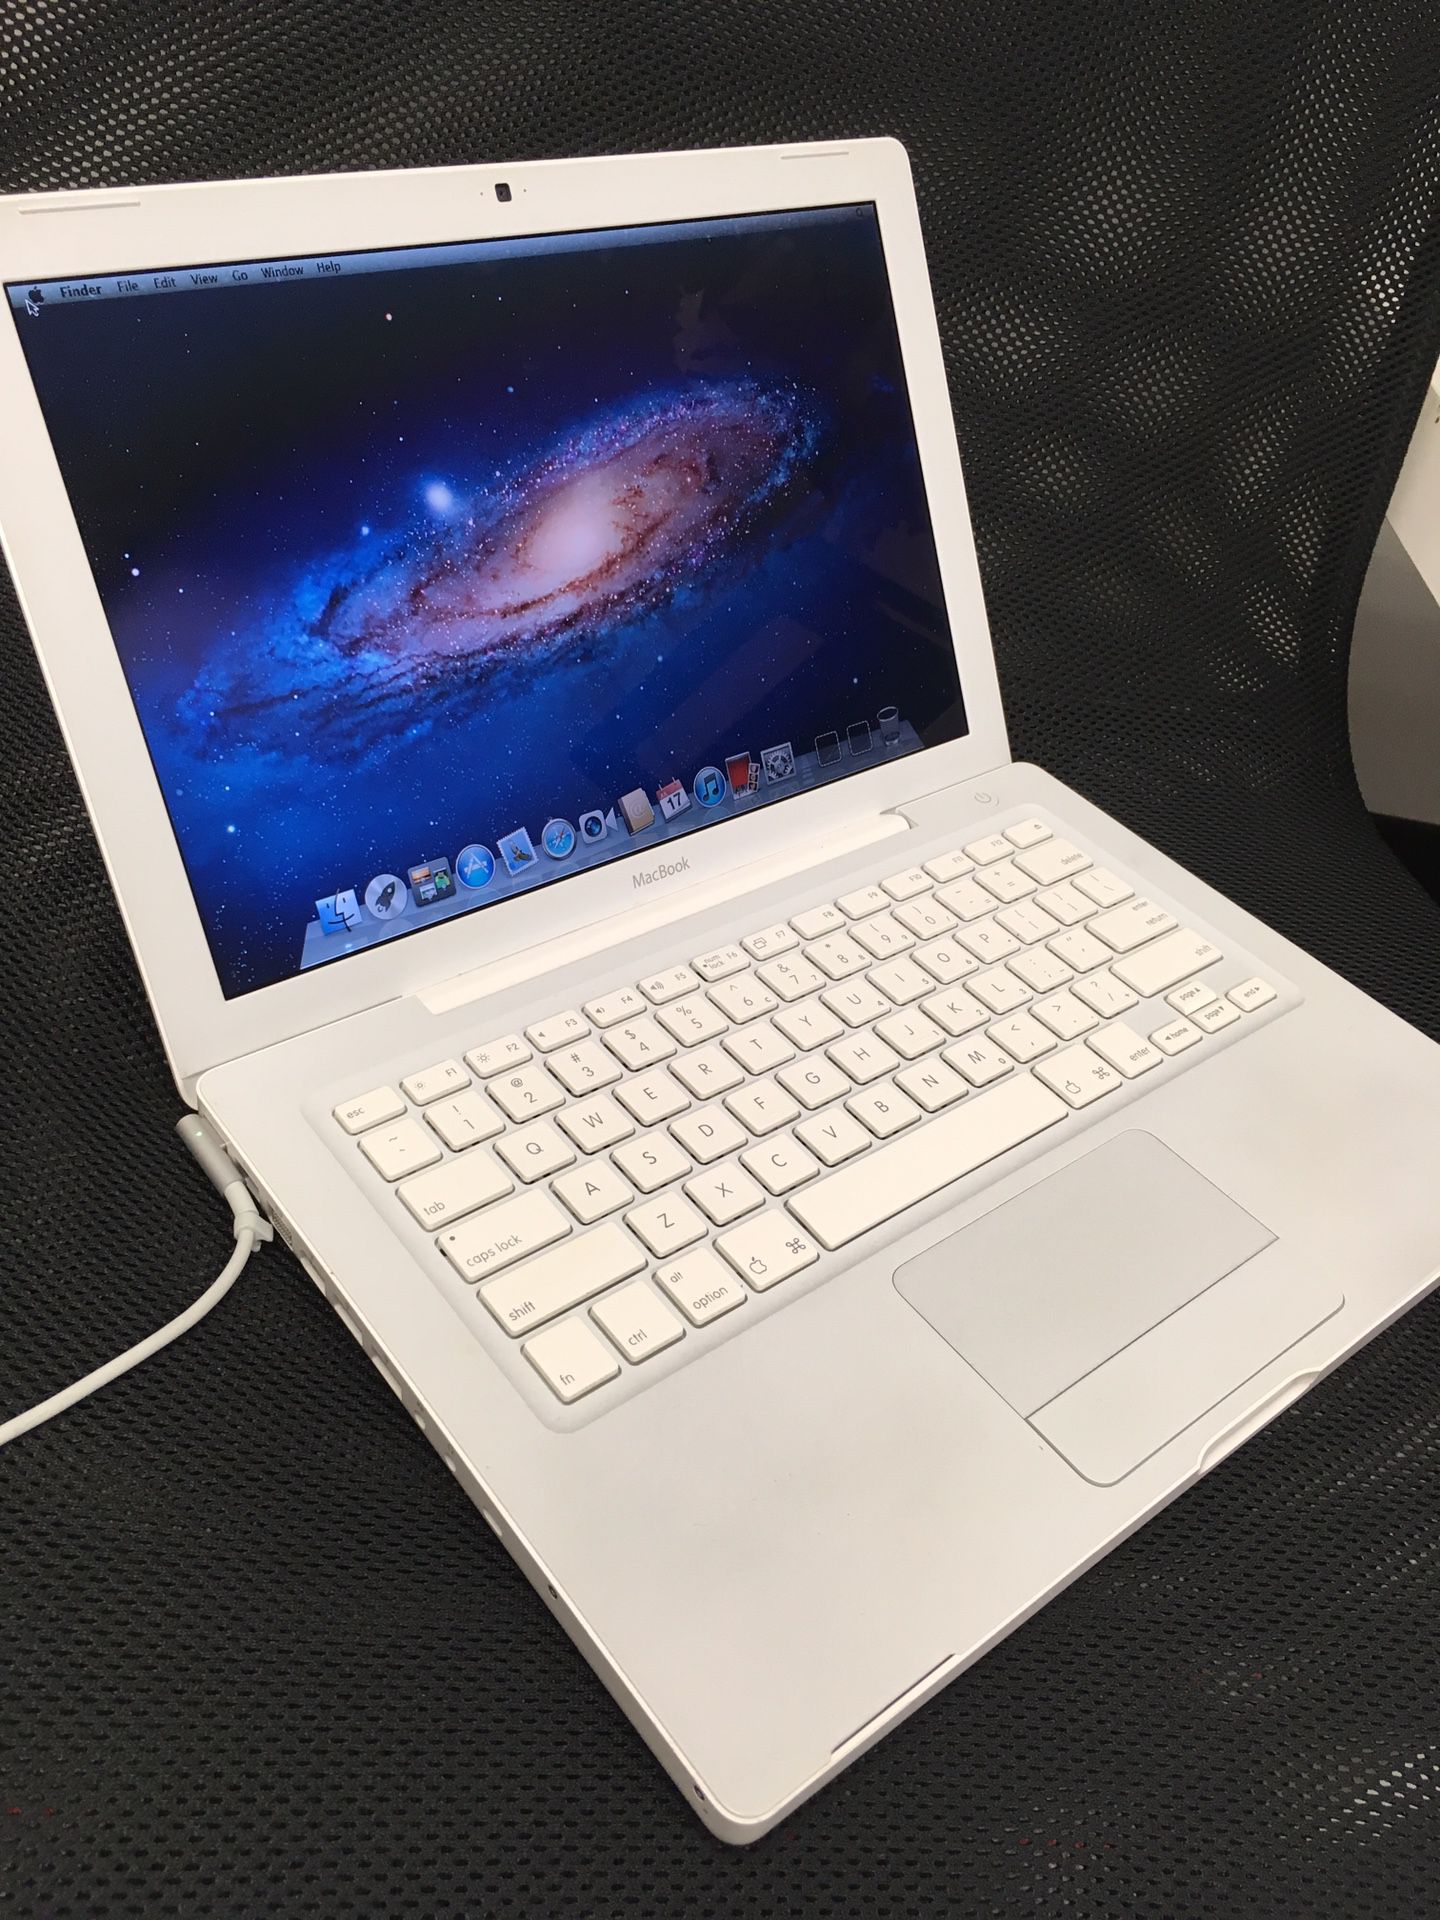 EXCELLENT CONDITION// Apple Macbook White // 2.16Ghz Core 2 DUO // 2GB RAM // 120GB HDD // ALMOST NEW GENUINE BATTERY // NO CHARGER // MAC OS X LION